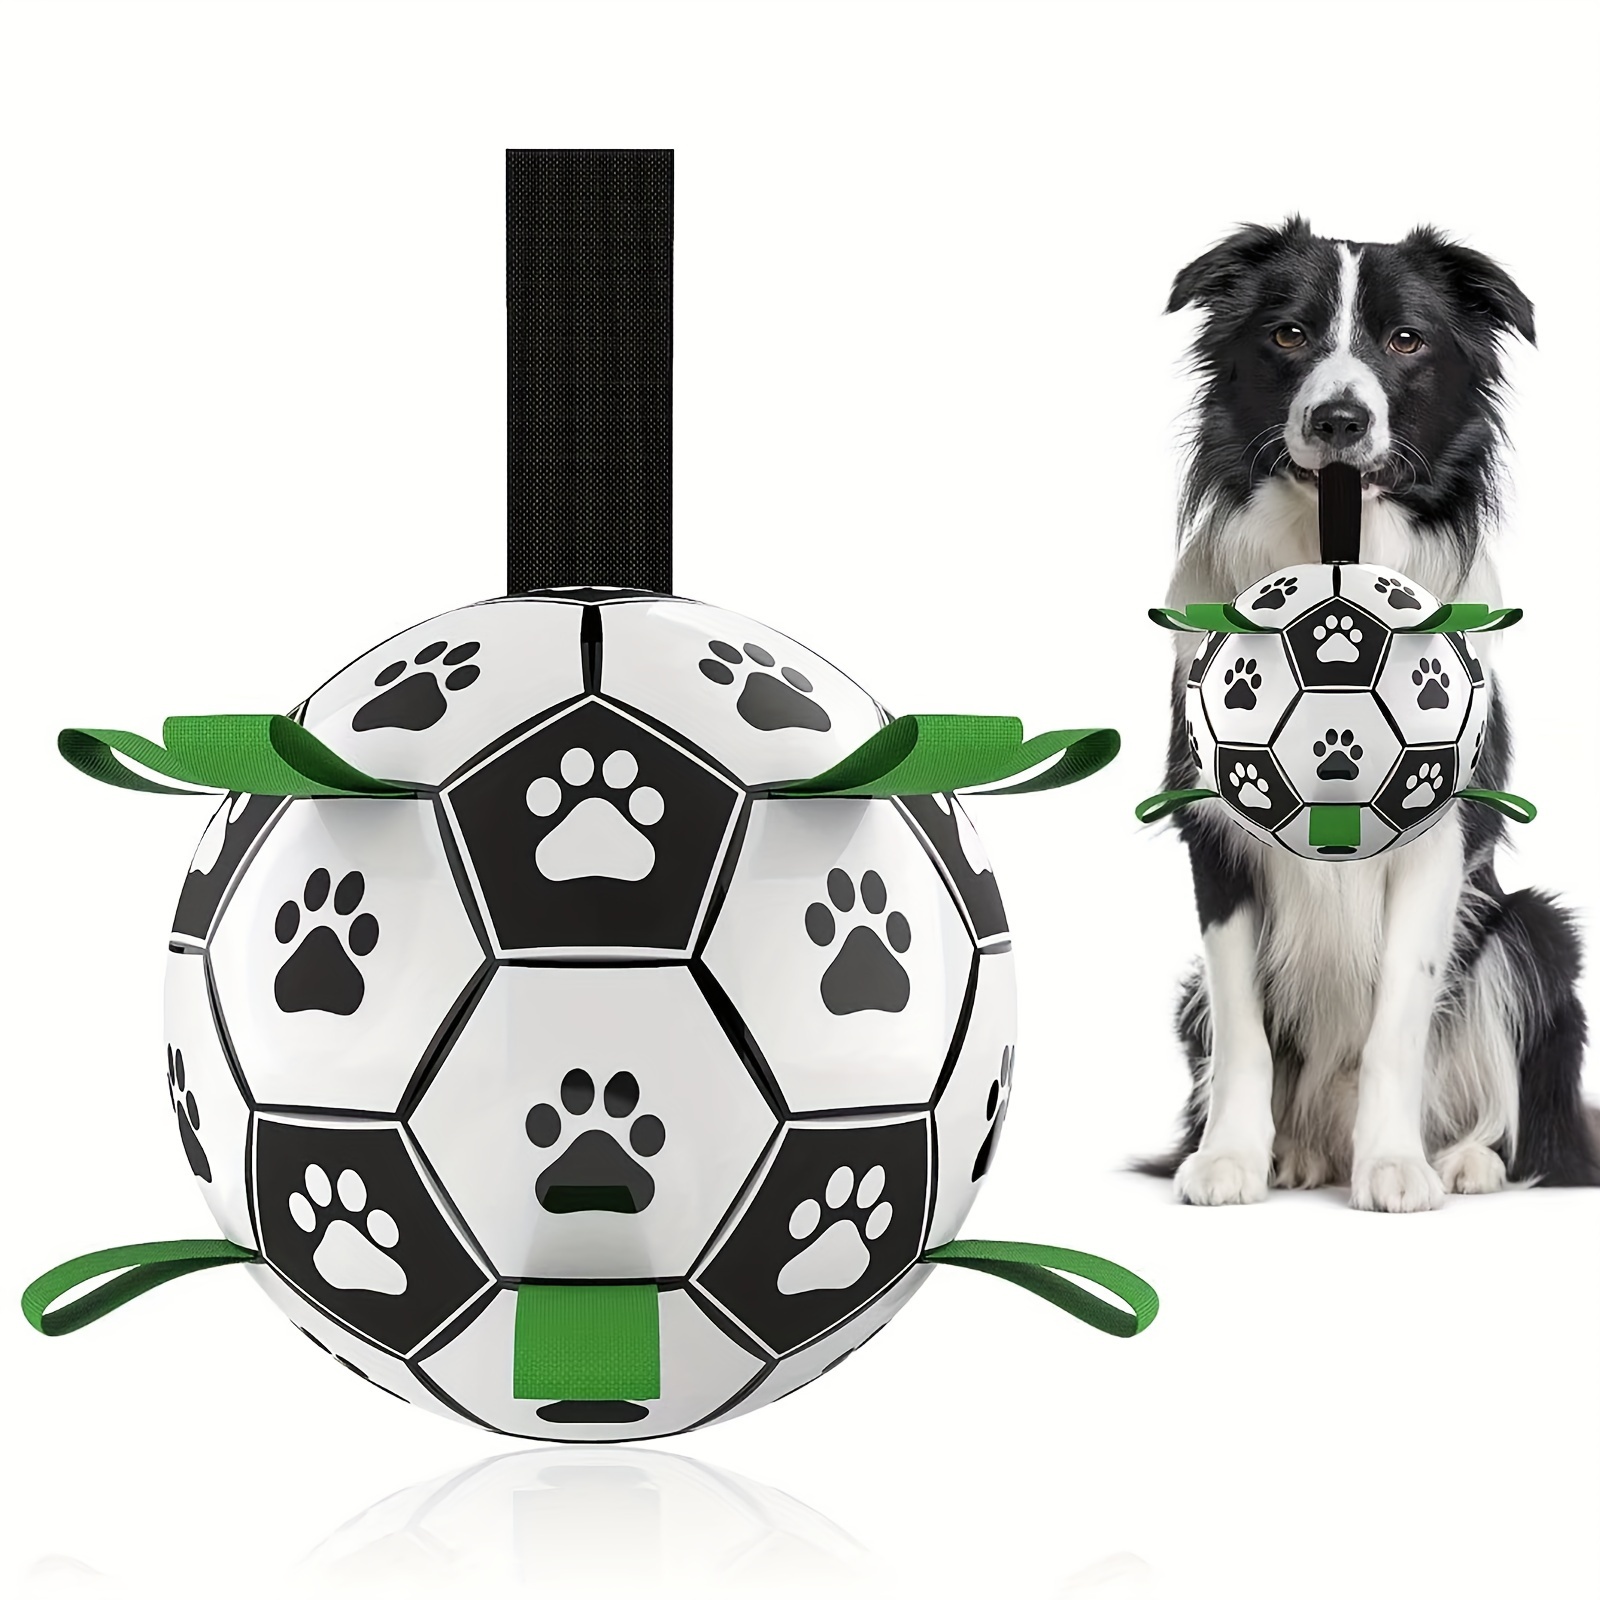 

1pc Durable Football Design Pet Toy With Straps Dog Chewing Ball Toy For Training Playing Teeth Cleaning, Interactive Fetch Pet Toy For Small Medium Large Dogs